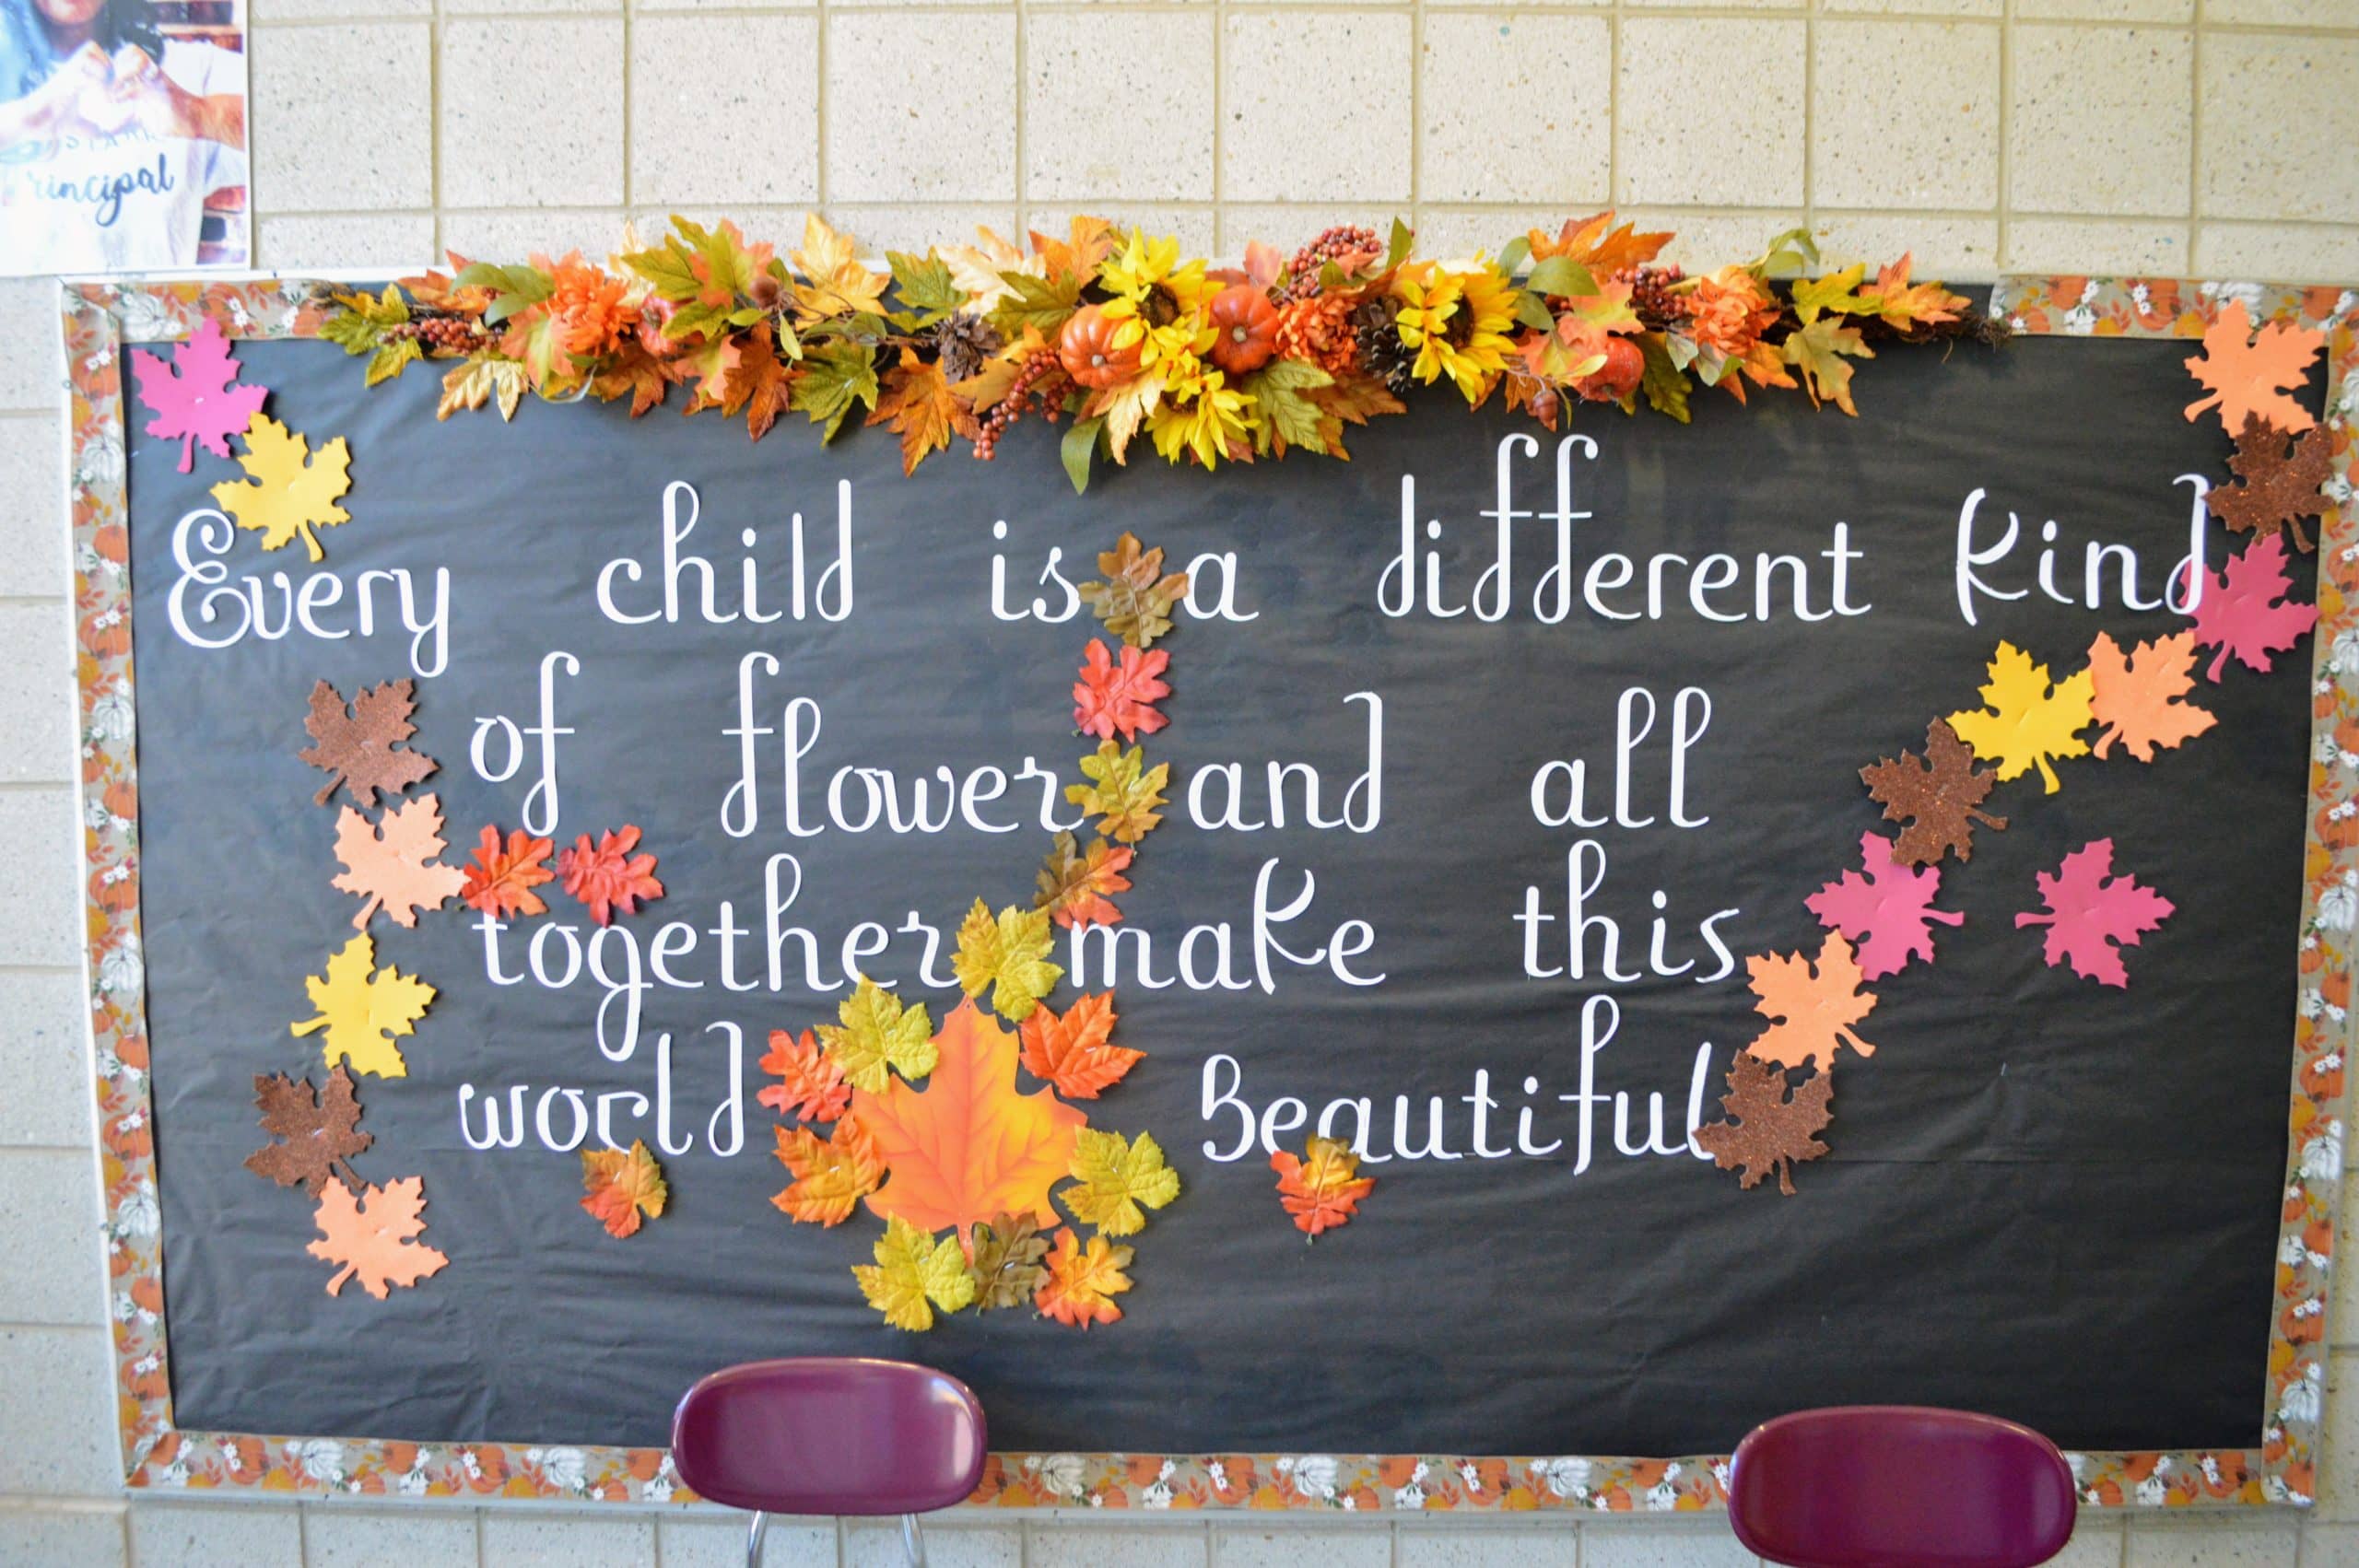 Every child is a different kind of flower and all together make this world beautiful